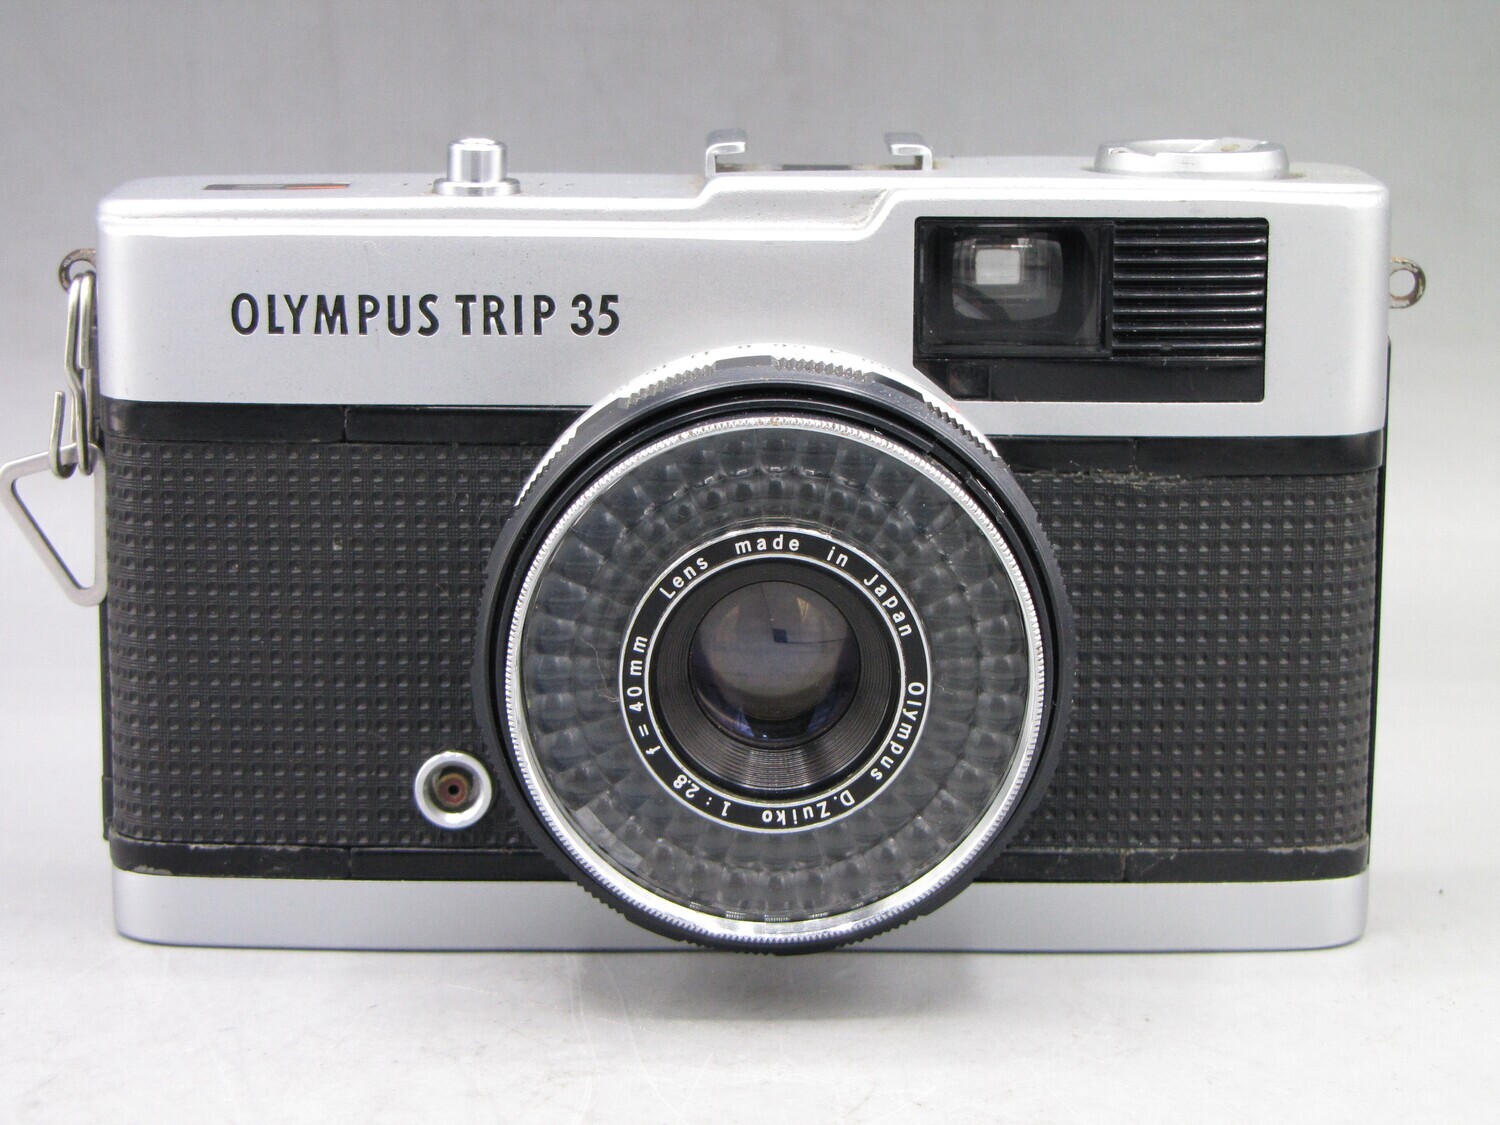 Olympus Trip 35 P&S 35mm Camera Clad Seals Battery Film Tested